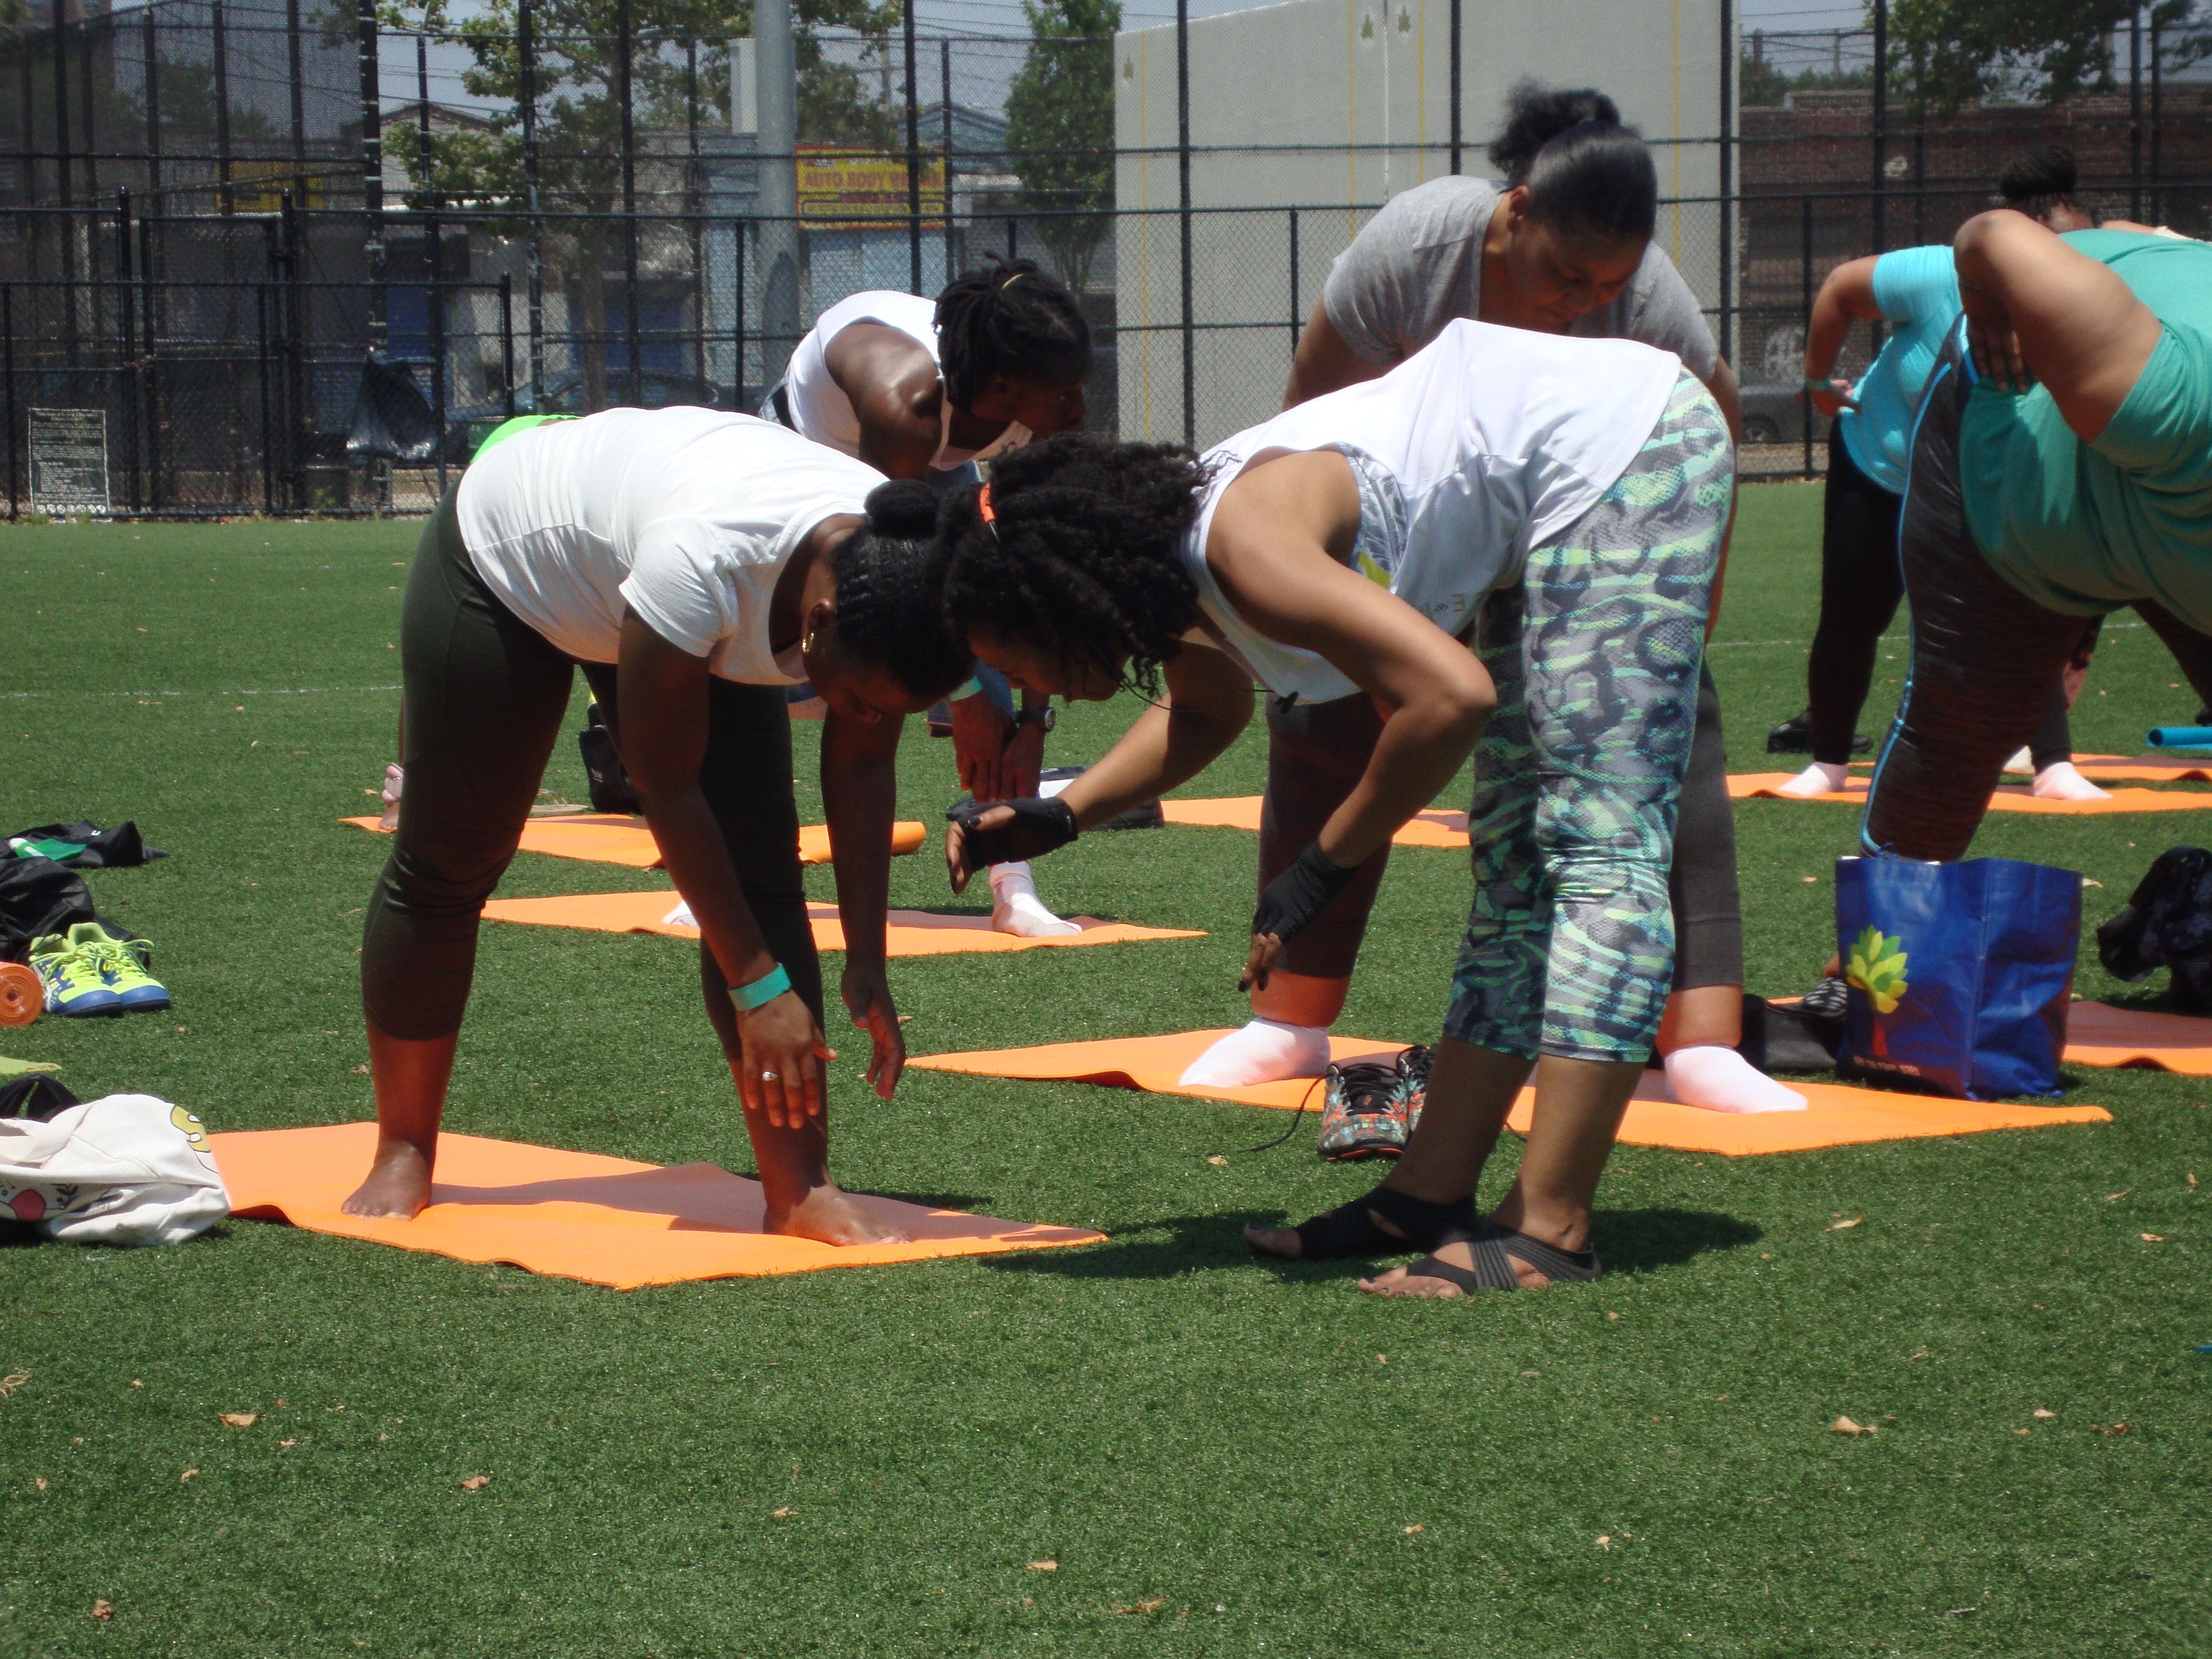 Some pose adjusting to individualize the yoga practice - Breathe Brownsville Brooklyn Yoga Festival